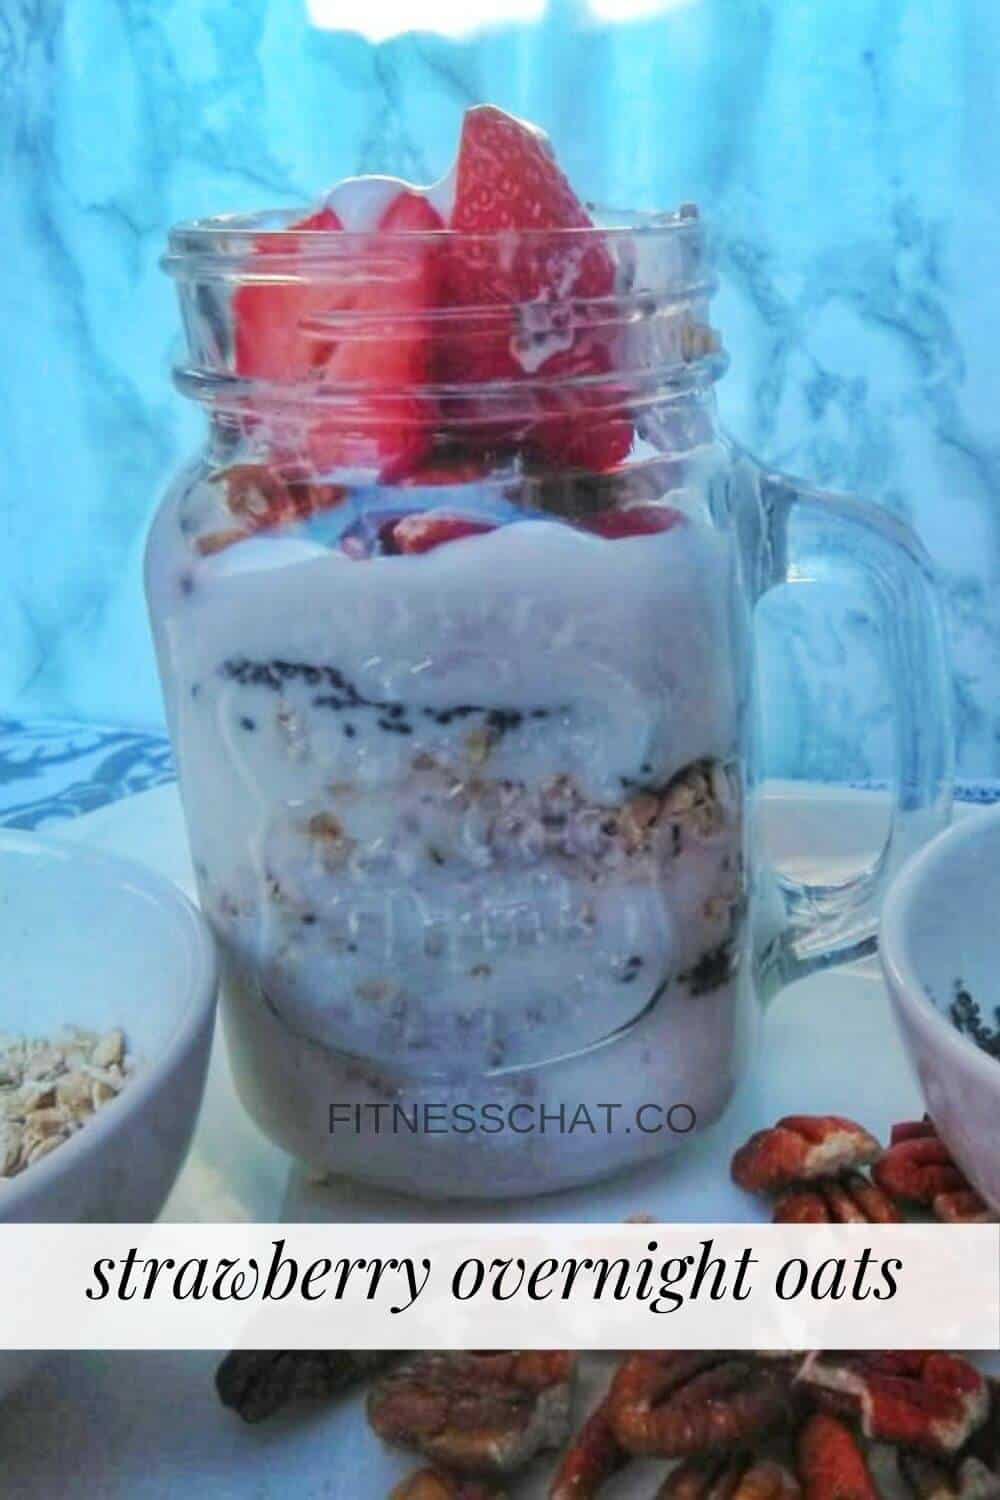 strawberry overnight oats with chia seeds